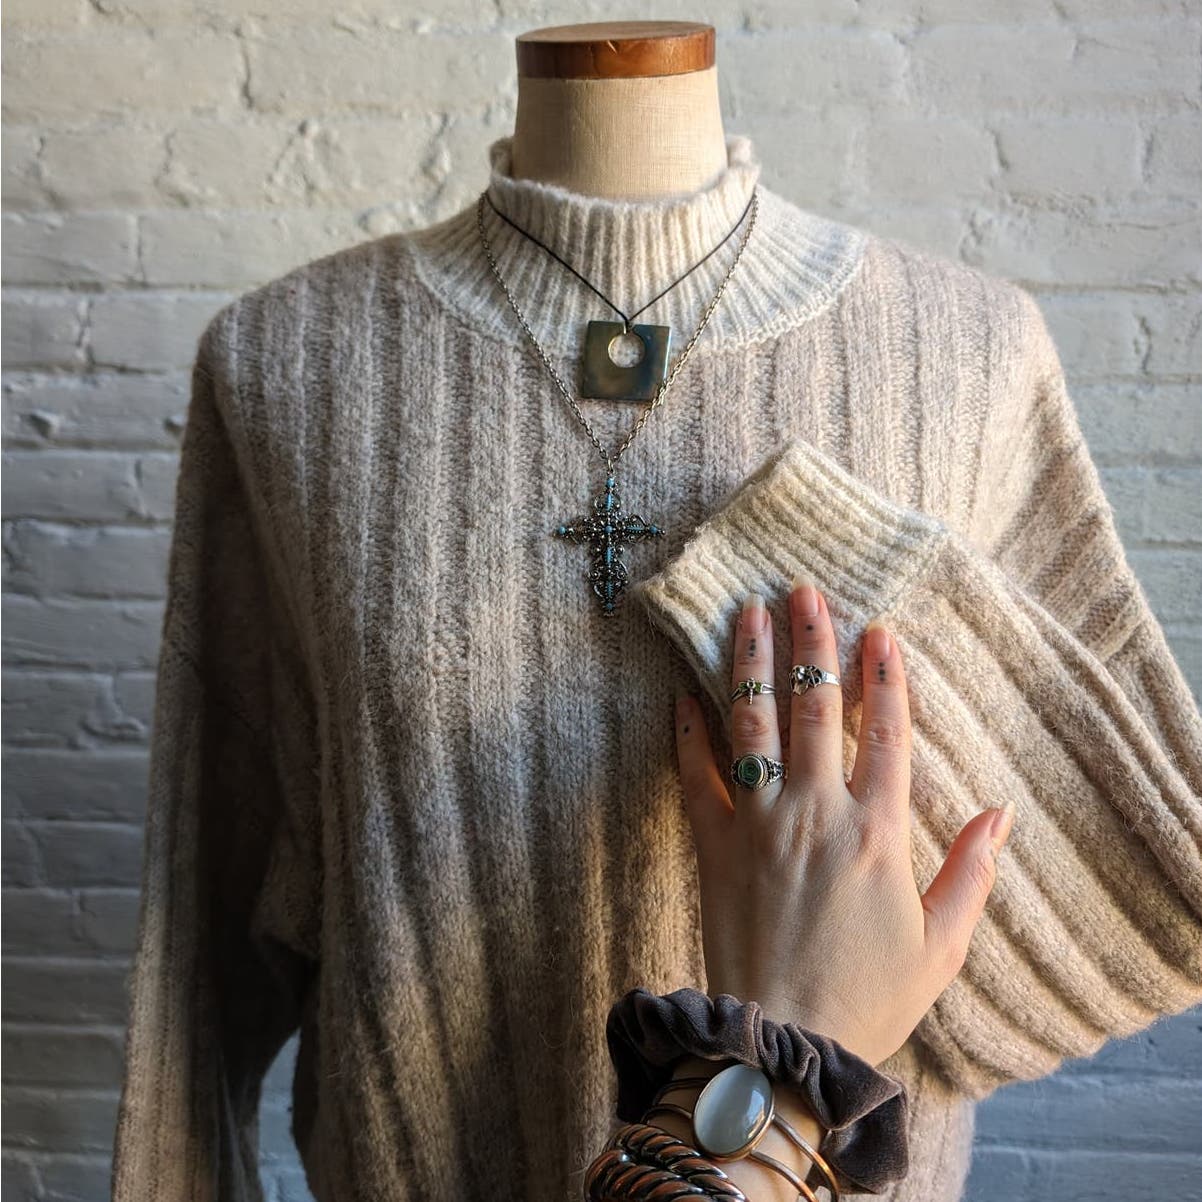 Y2K Vintage Minimalist Neutral Knit Wool Sweater Chunky Cable Knit Boho Chic Top